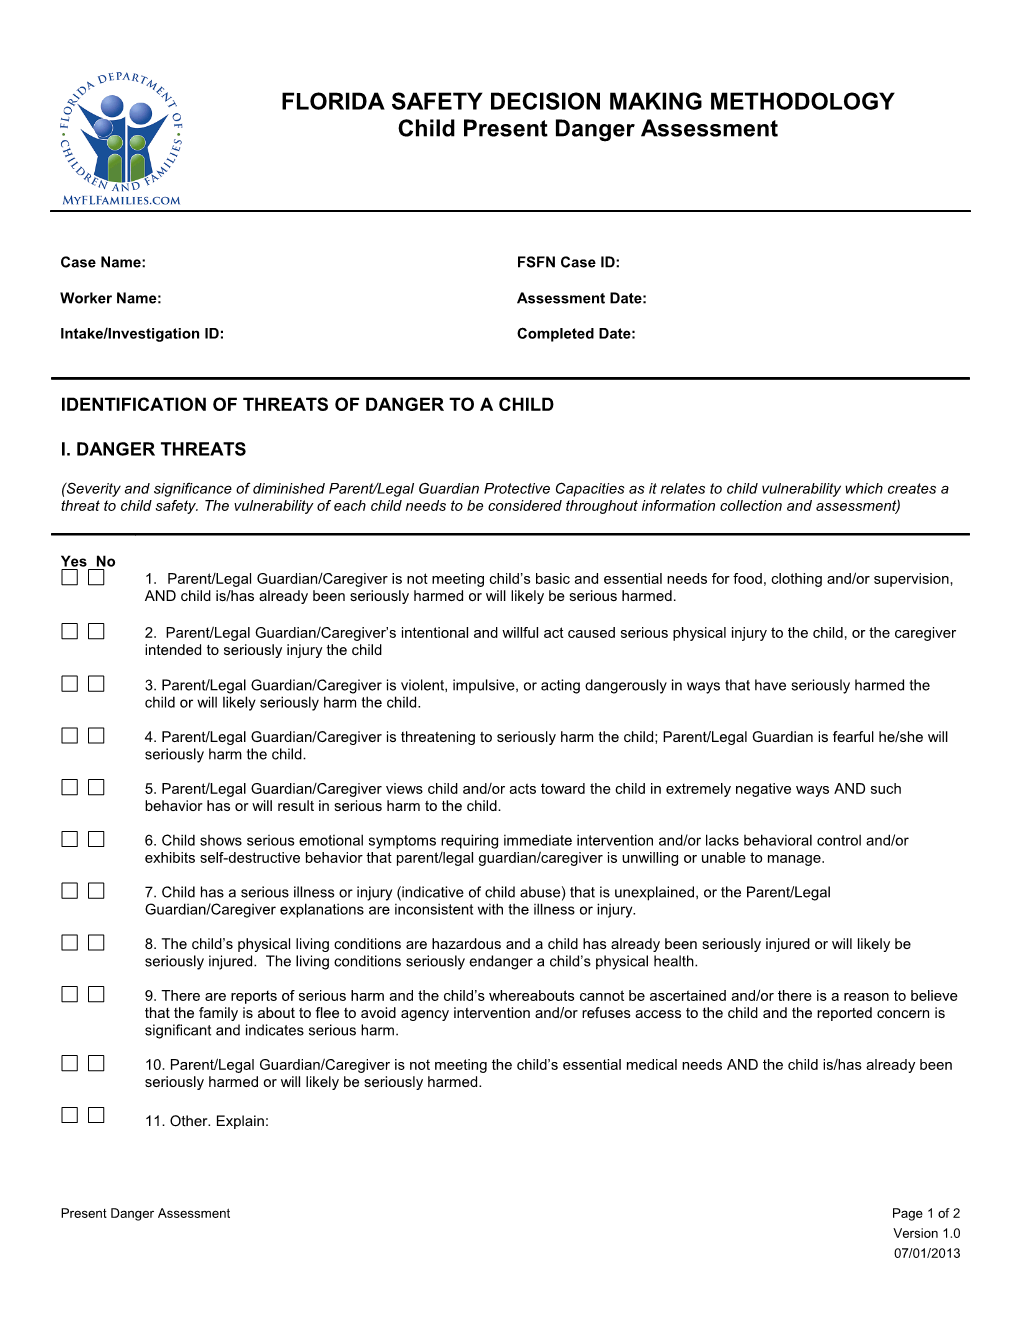 Present Danger Assessment Page 1 of 2